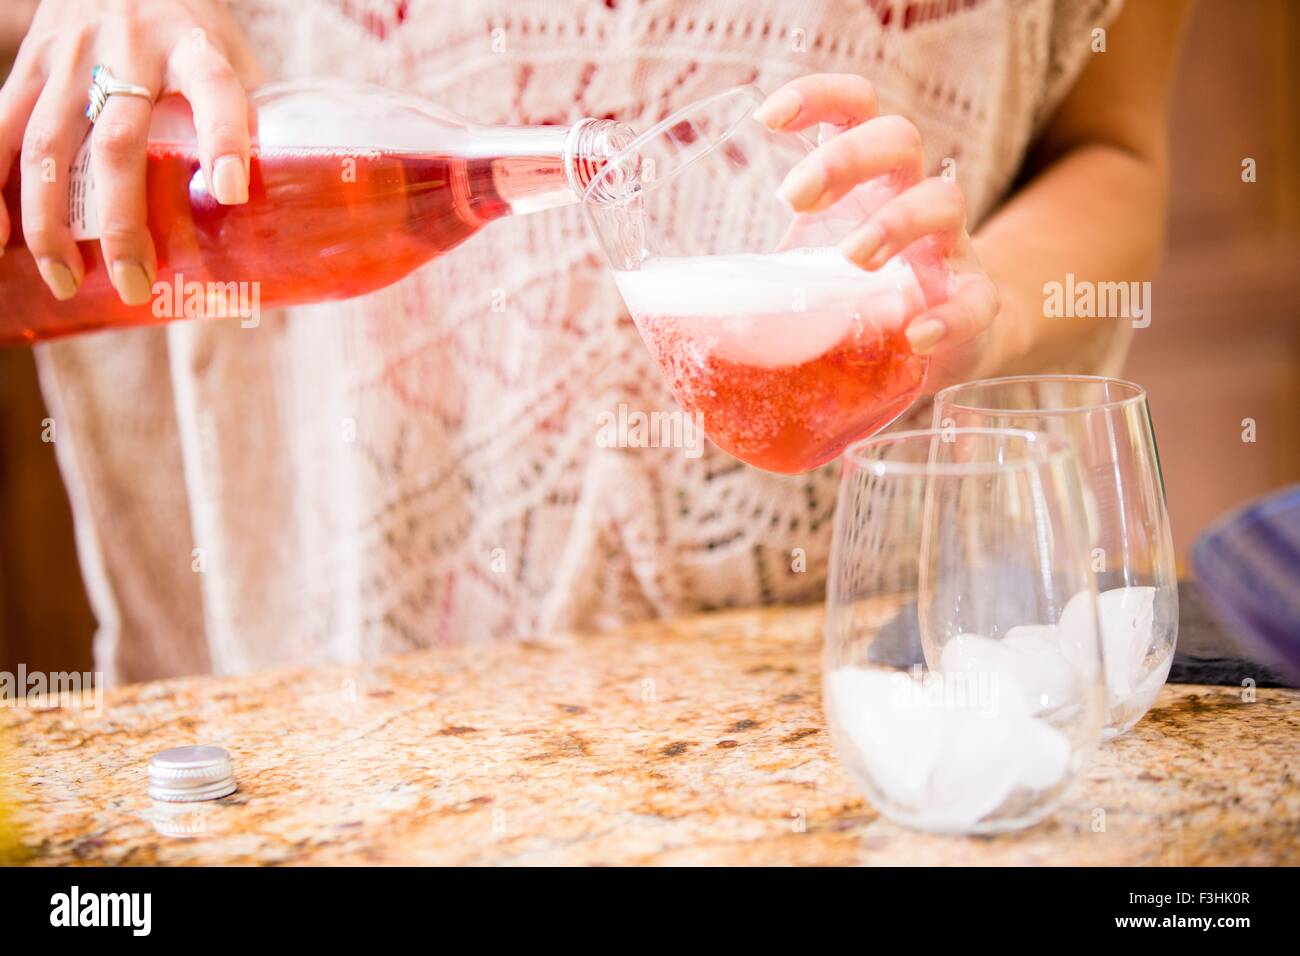 Close up of young woman pouring rose wine at kitchen counter Stock Photo